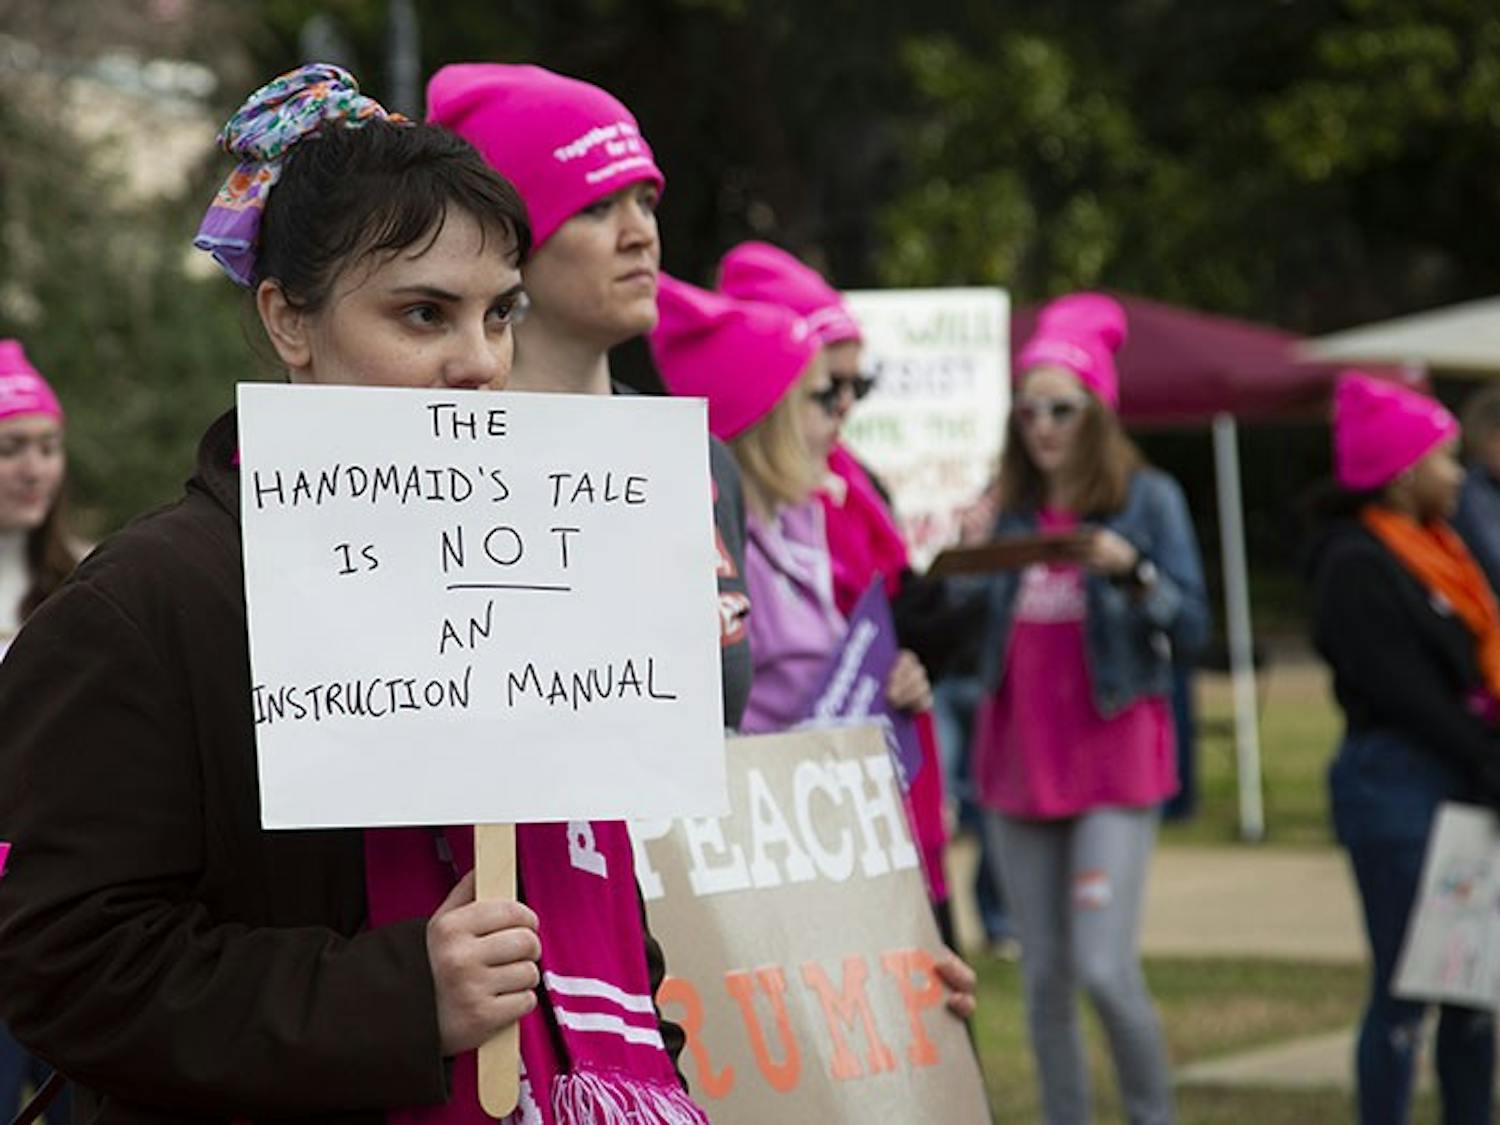 Hana Rill, Statitionist
Hana Rill attended Columbia’s Women’s March holding a sign that read “The Handmaid’s Tale is not an instruction manual.” Rill traveled to the march from Summerville, South Carolina.